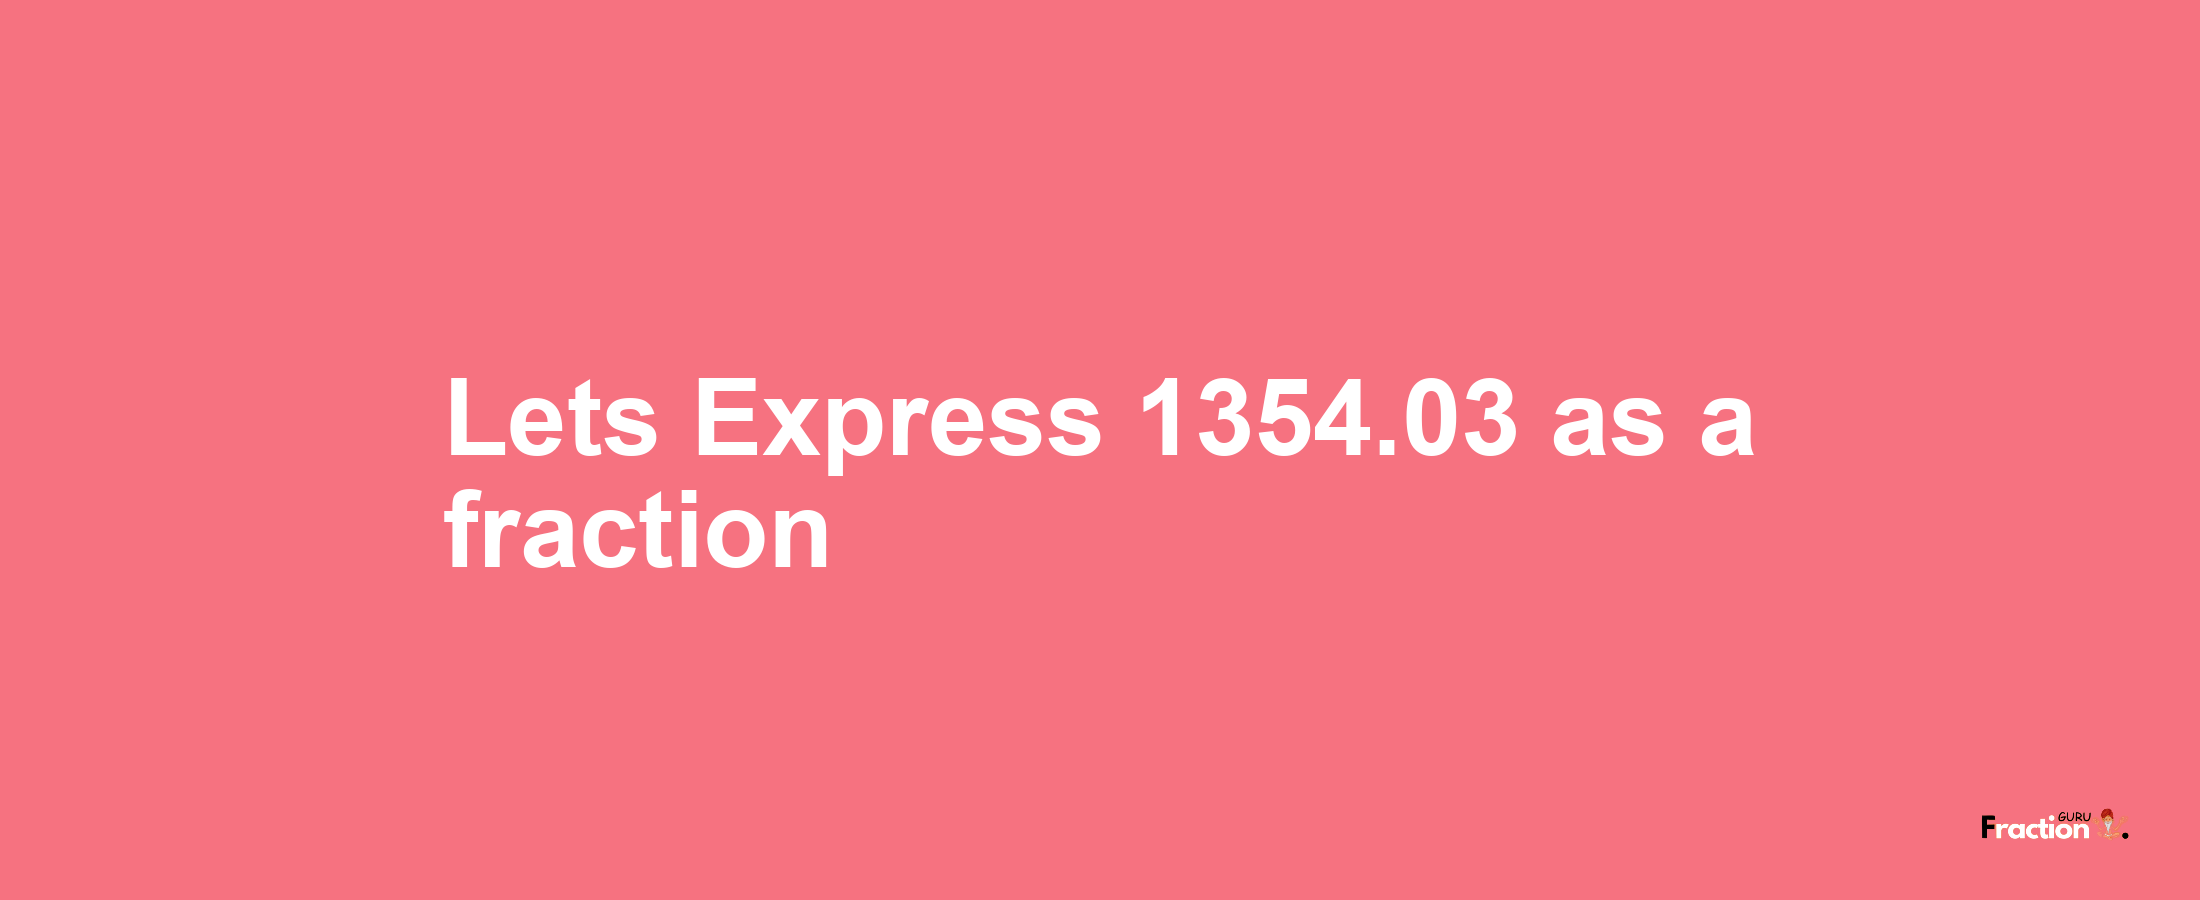 Lets Express 1354.03 as afraction